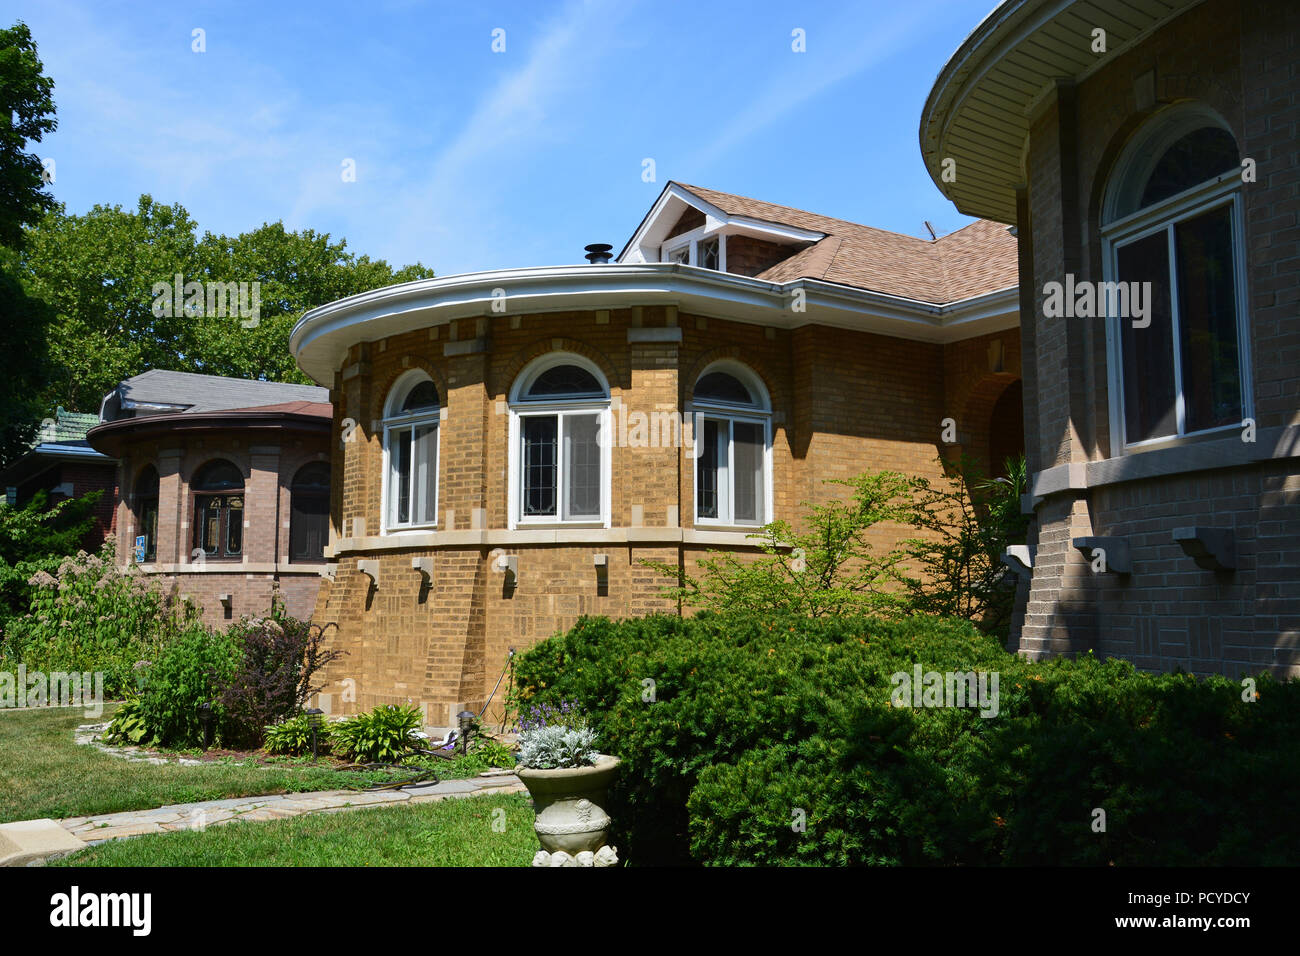 The Rogers Park Manor Historic District features a dense cluster of unmodified Chicago style bungalows built in the 1920's following WWI. Stock Photo